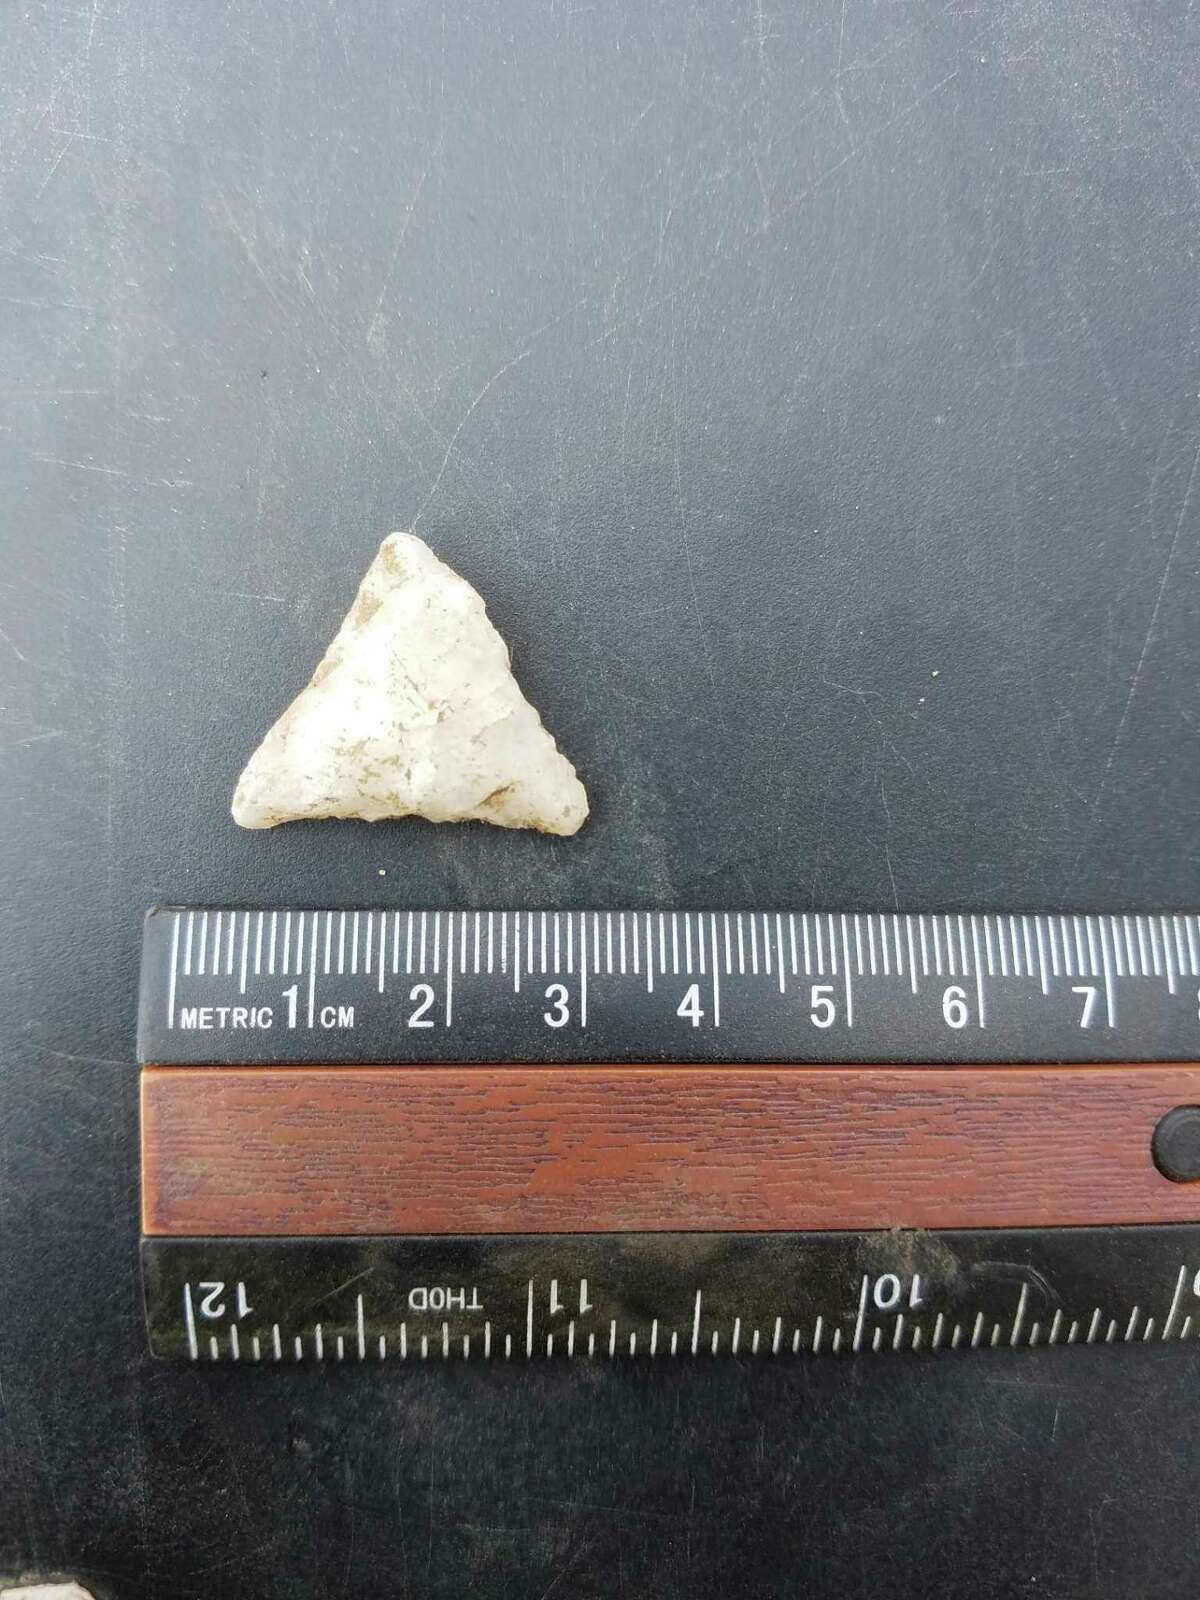 A quartz-point arrowhead unearthed at the Walk Bridge construction zone in East Norwalk.